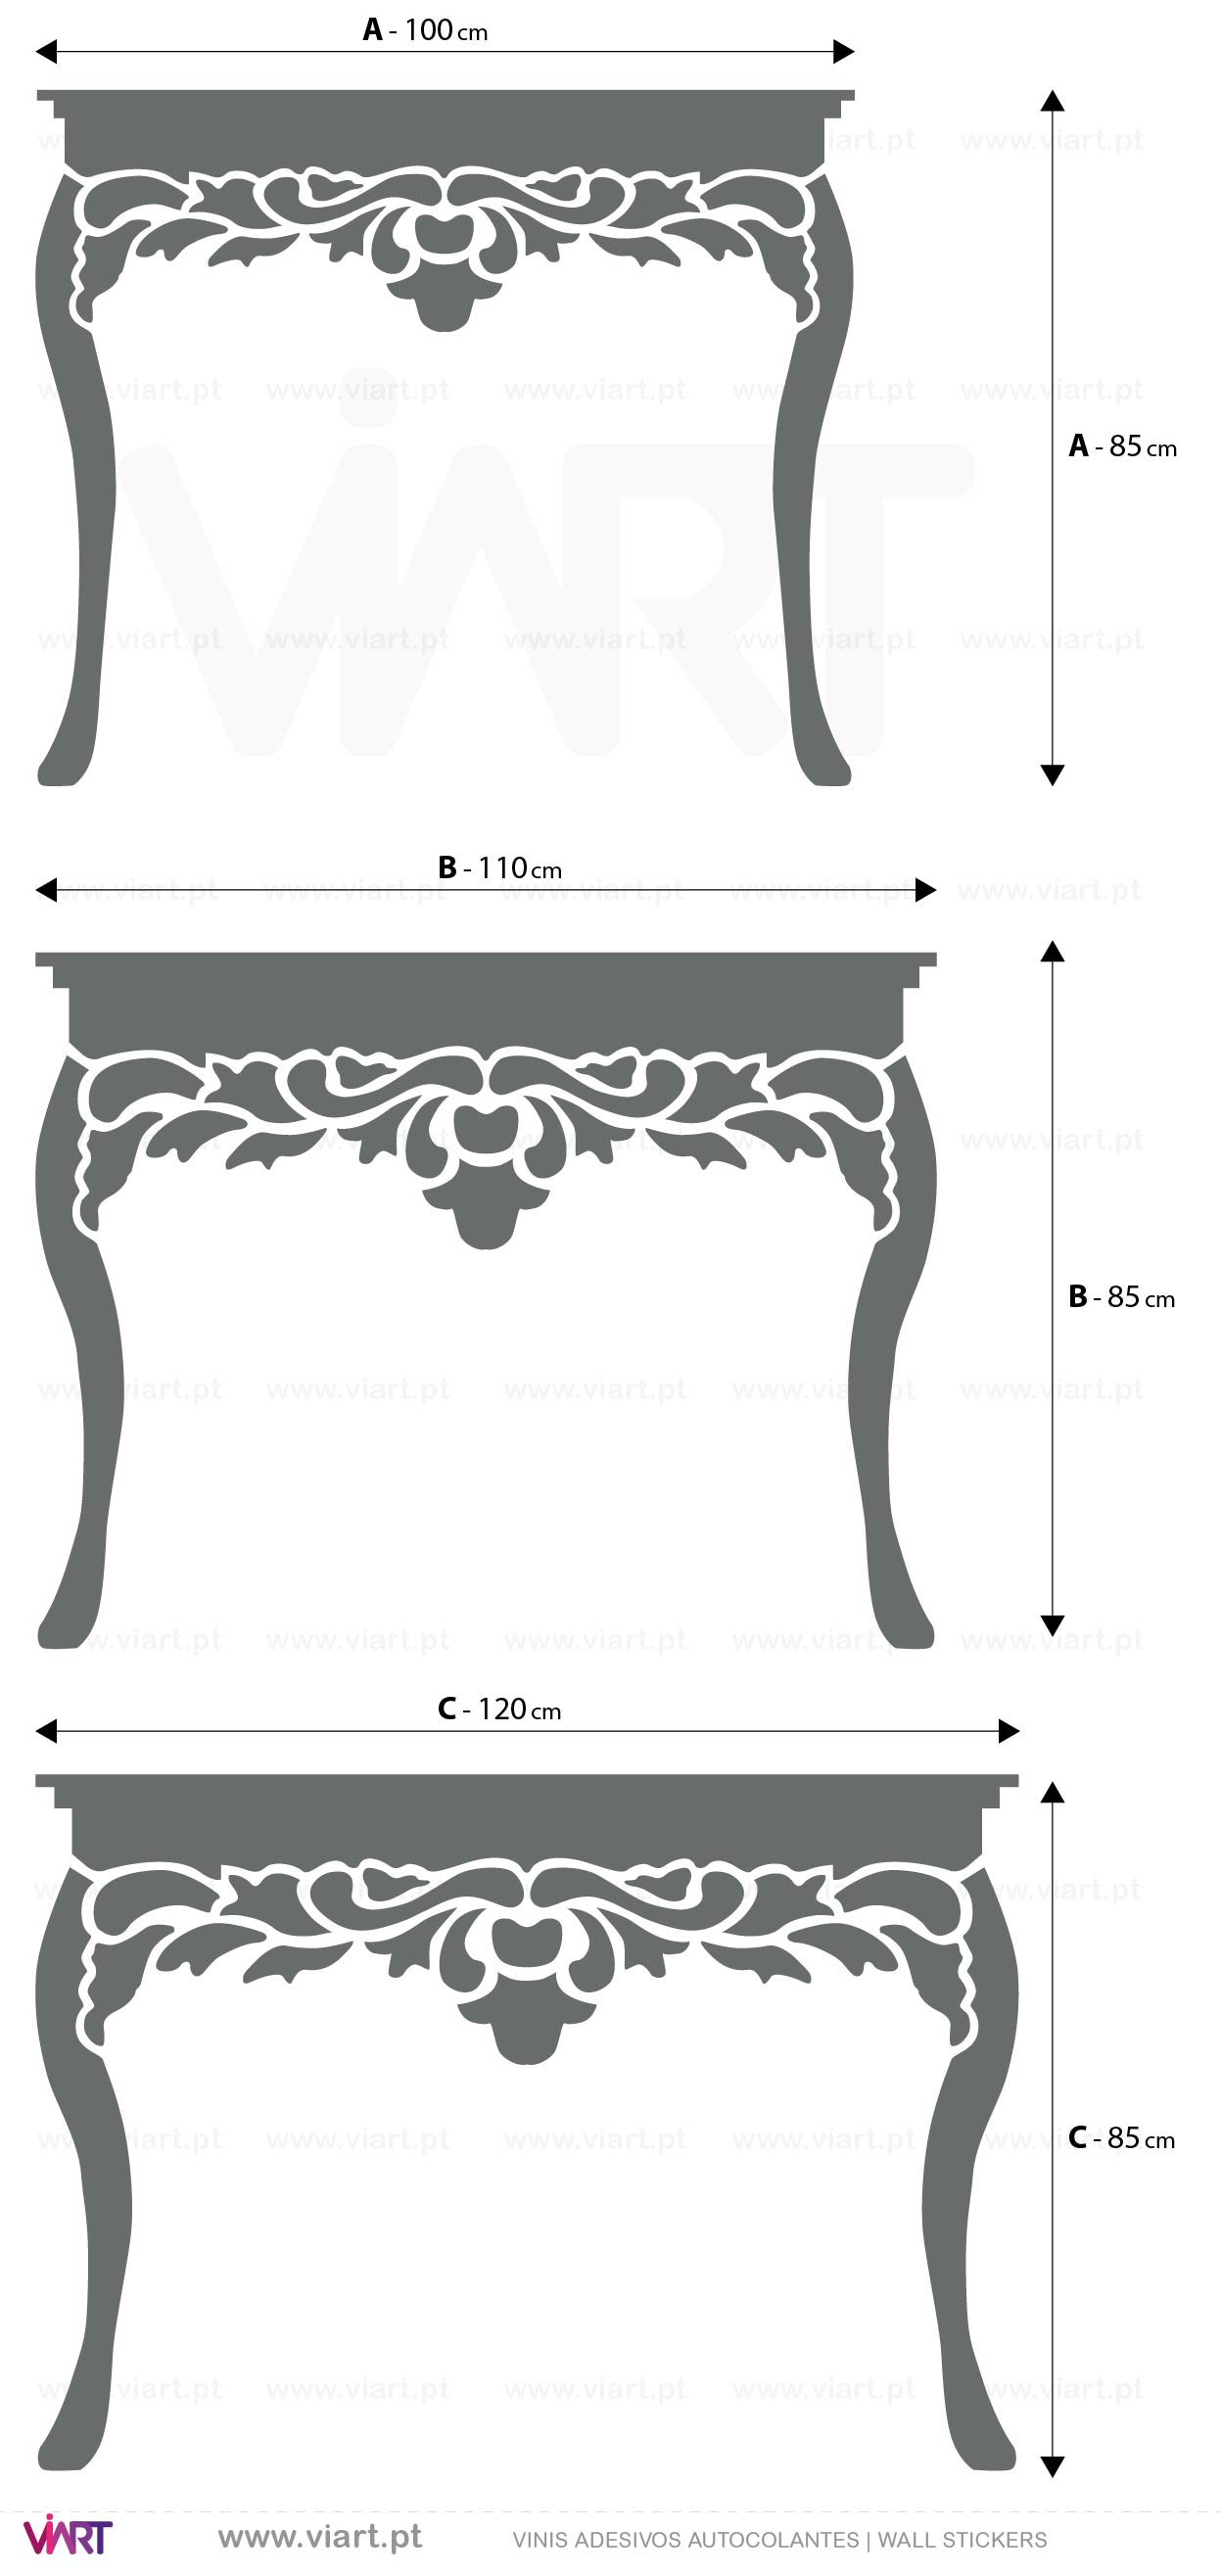 Viart - WALL STICKERS - Console Tables | Hall Table! Decal Measures